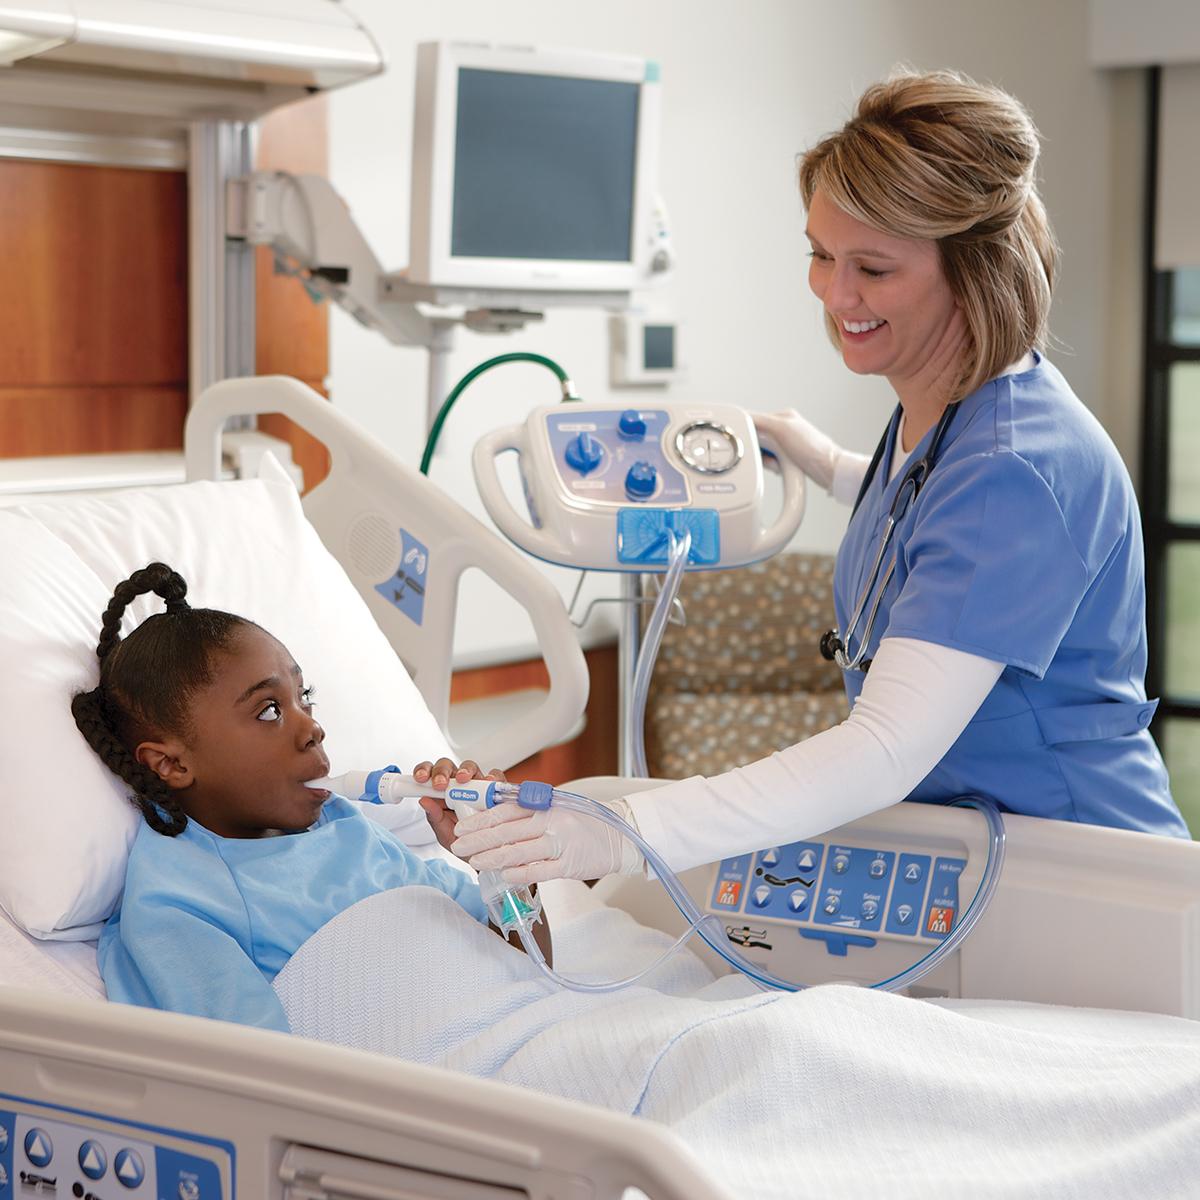 A young patient in a hospital bed receives therapy from the MetaNeb system, with help from her clinician